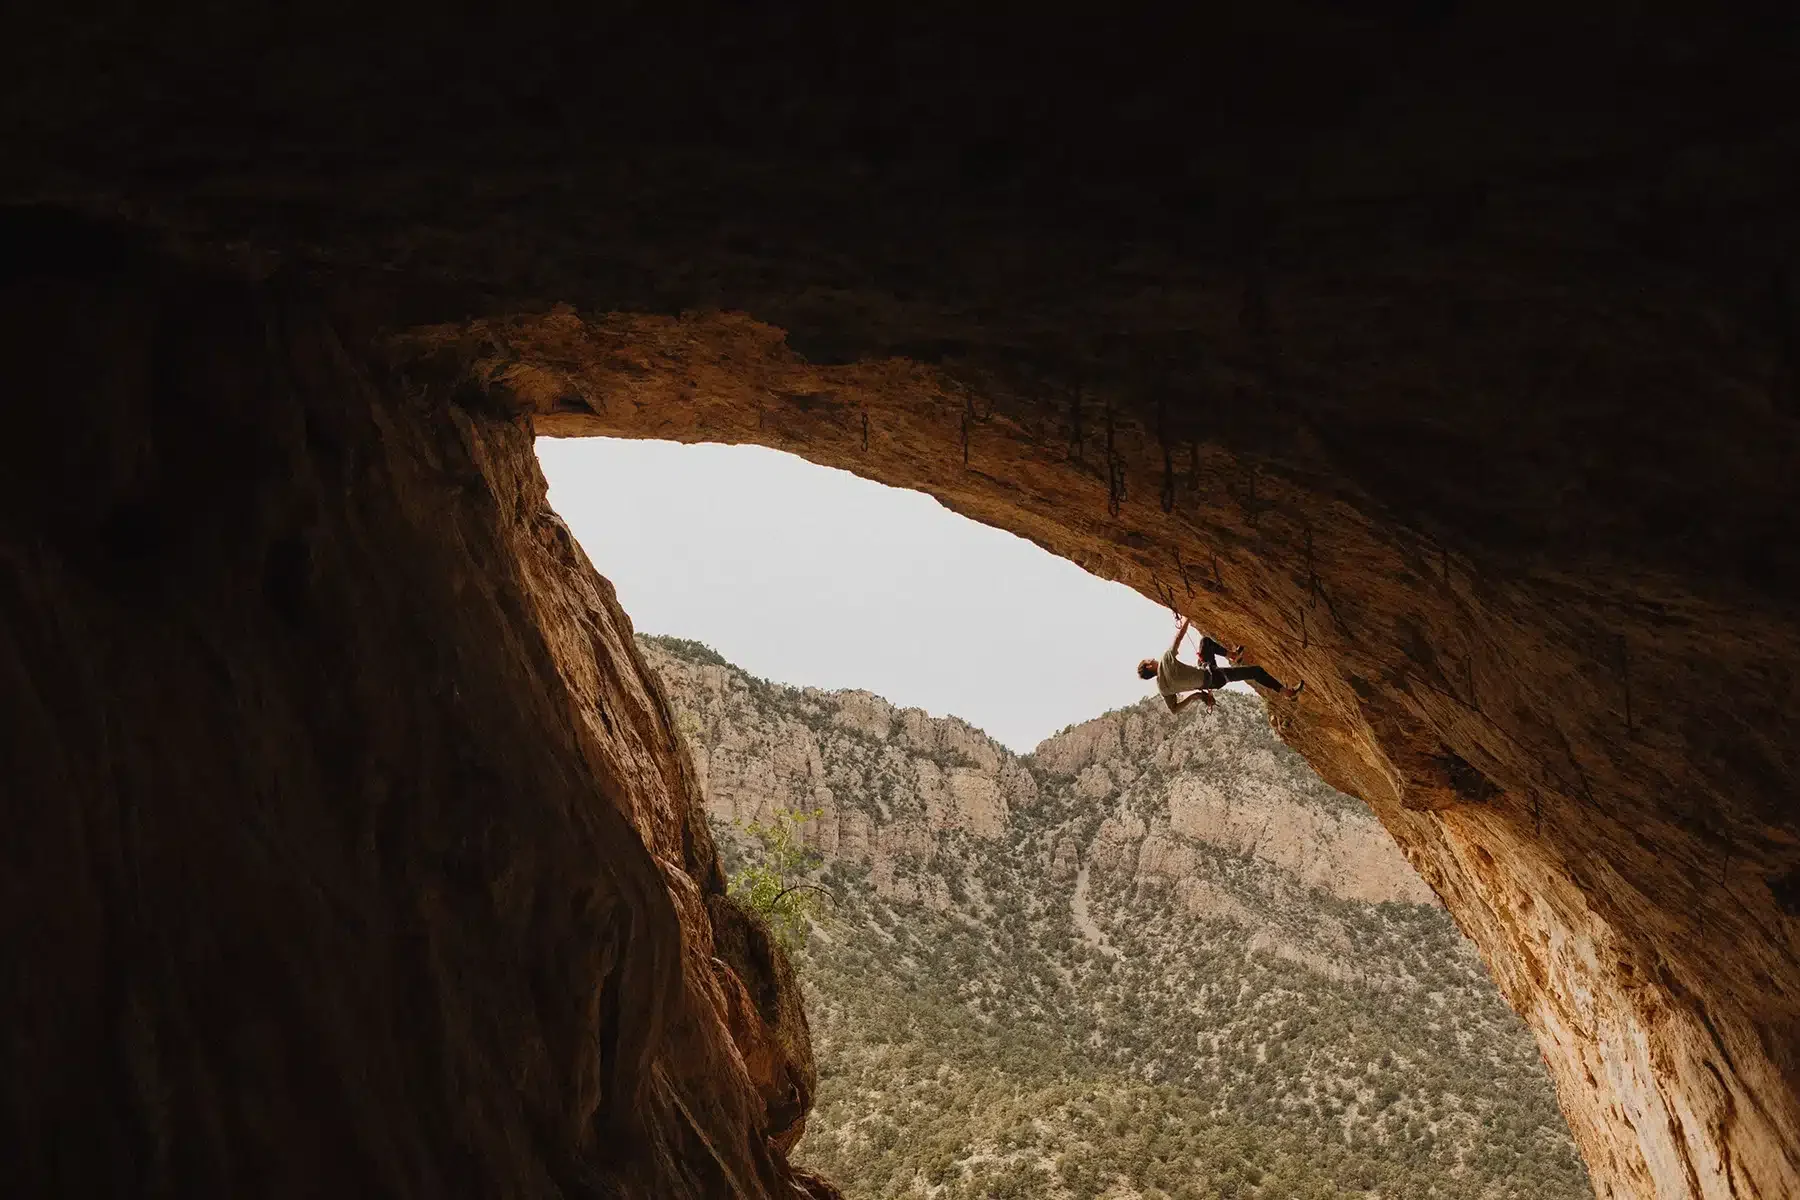 A rock climber is hanging from the roof of a large cave with rugged, reddish rock formations. The climber is secured by a harness and rope, and a mountain range covered in green trees is visible in the background through the cave opening.